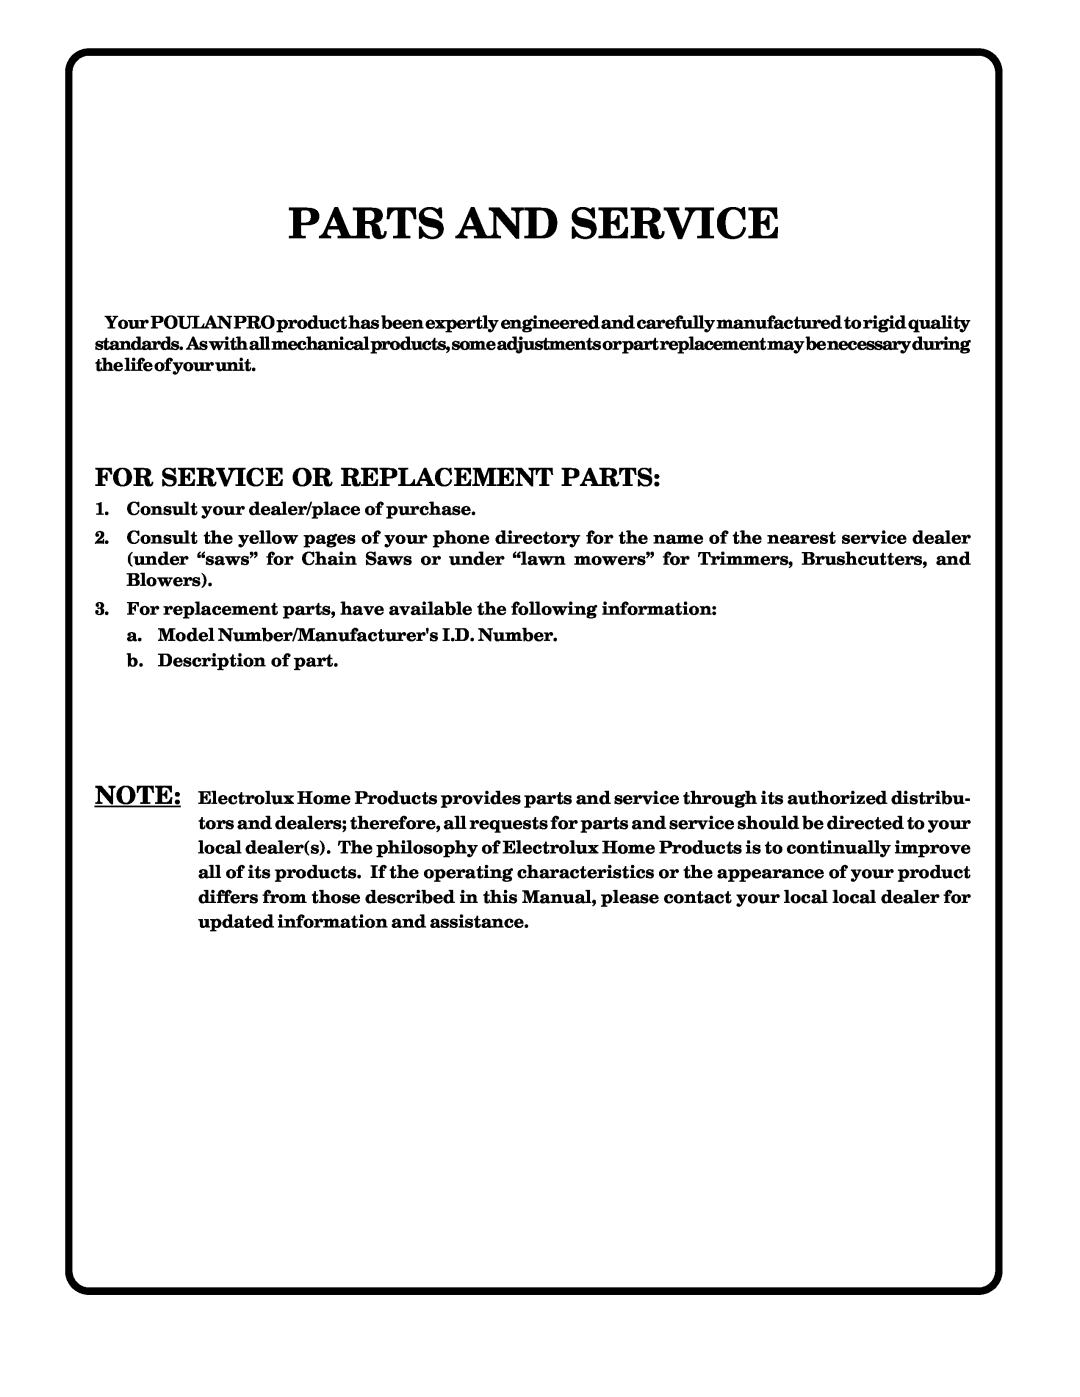 Poulan 177029 owner manual Parts And Service, For Service Or Replacement Parts 